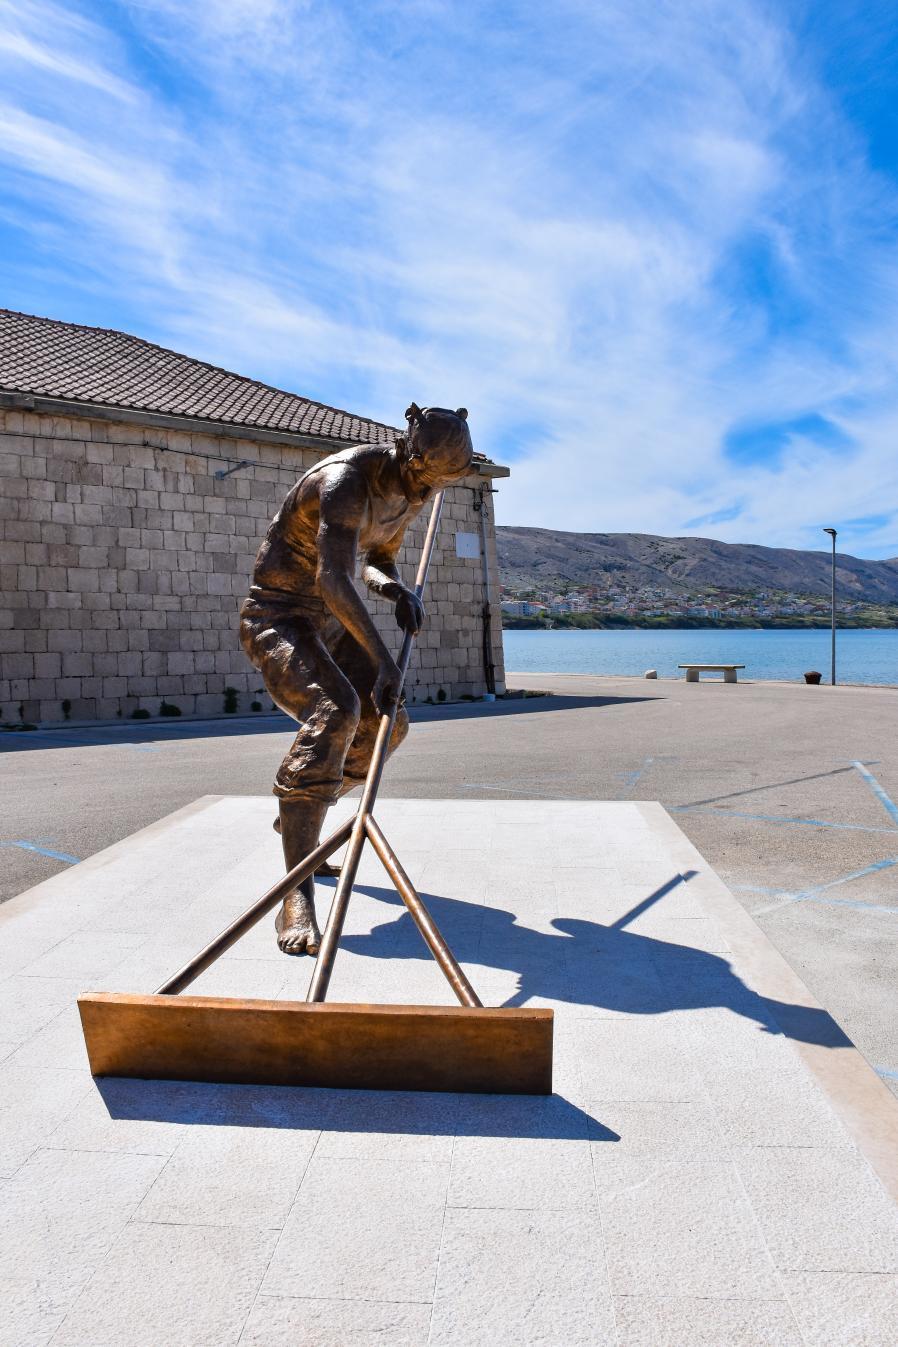 Statue dedicated to century-old salt tradition unveiled on Croatian island of Pag 